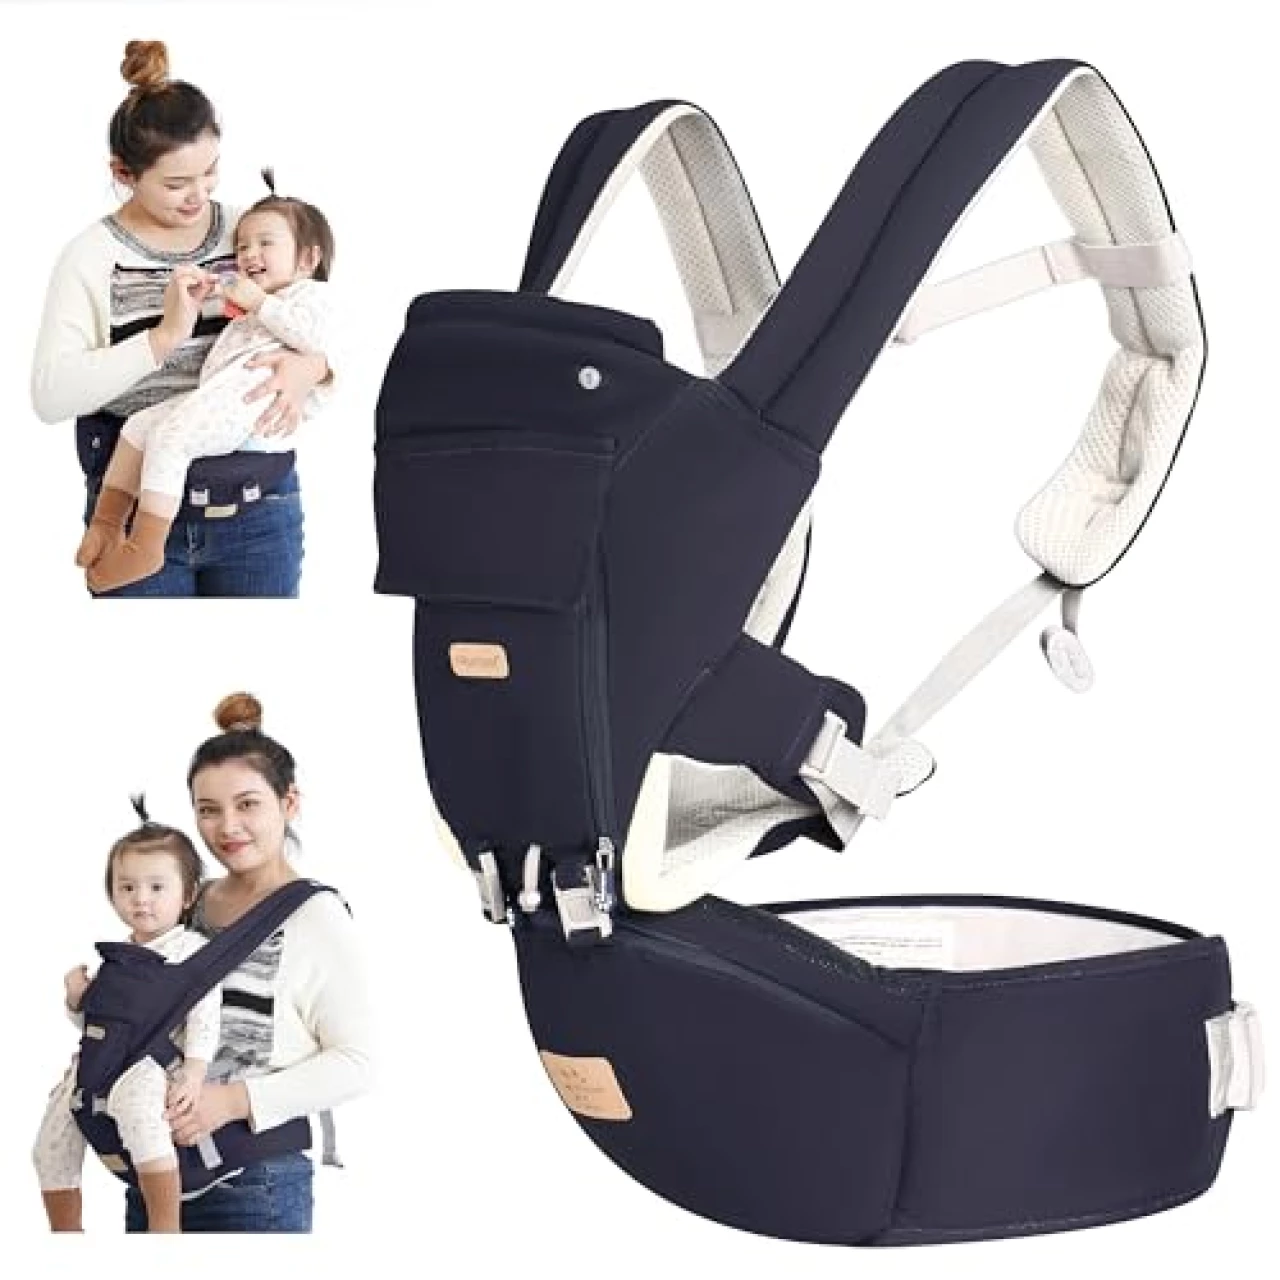 Baby - Carrier, 6-in-1 Baby Carrier with Waist Stool-, FRUITEAM Baby Carrier with Hip Seat for Breastfeeding, One Size Fits All - Adapt to Newborn, Infant &amp; Toddler (Navy)